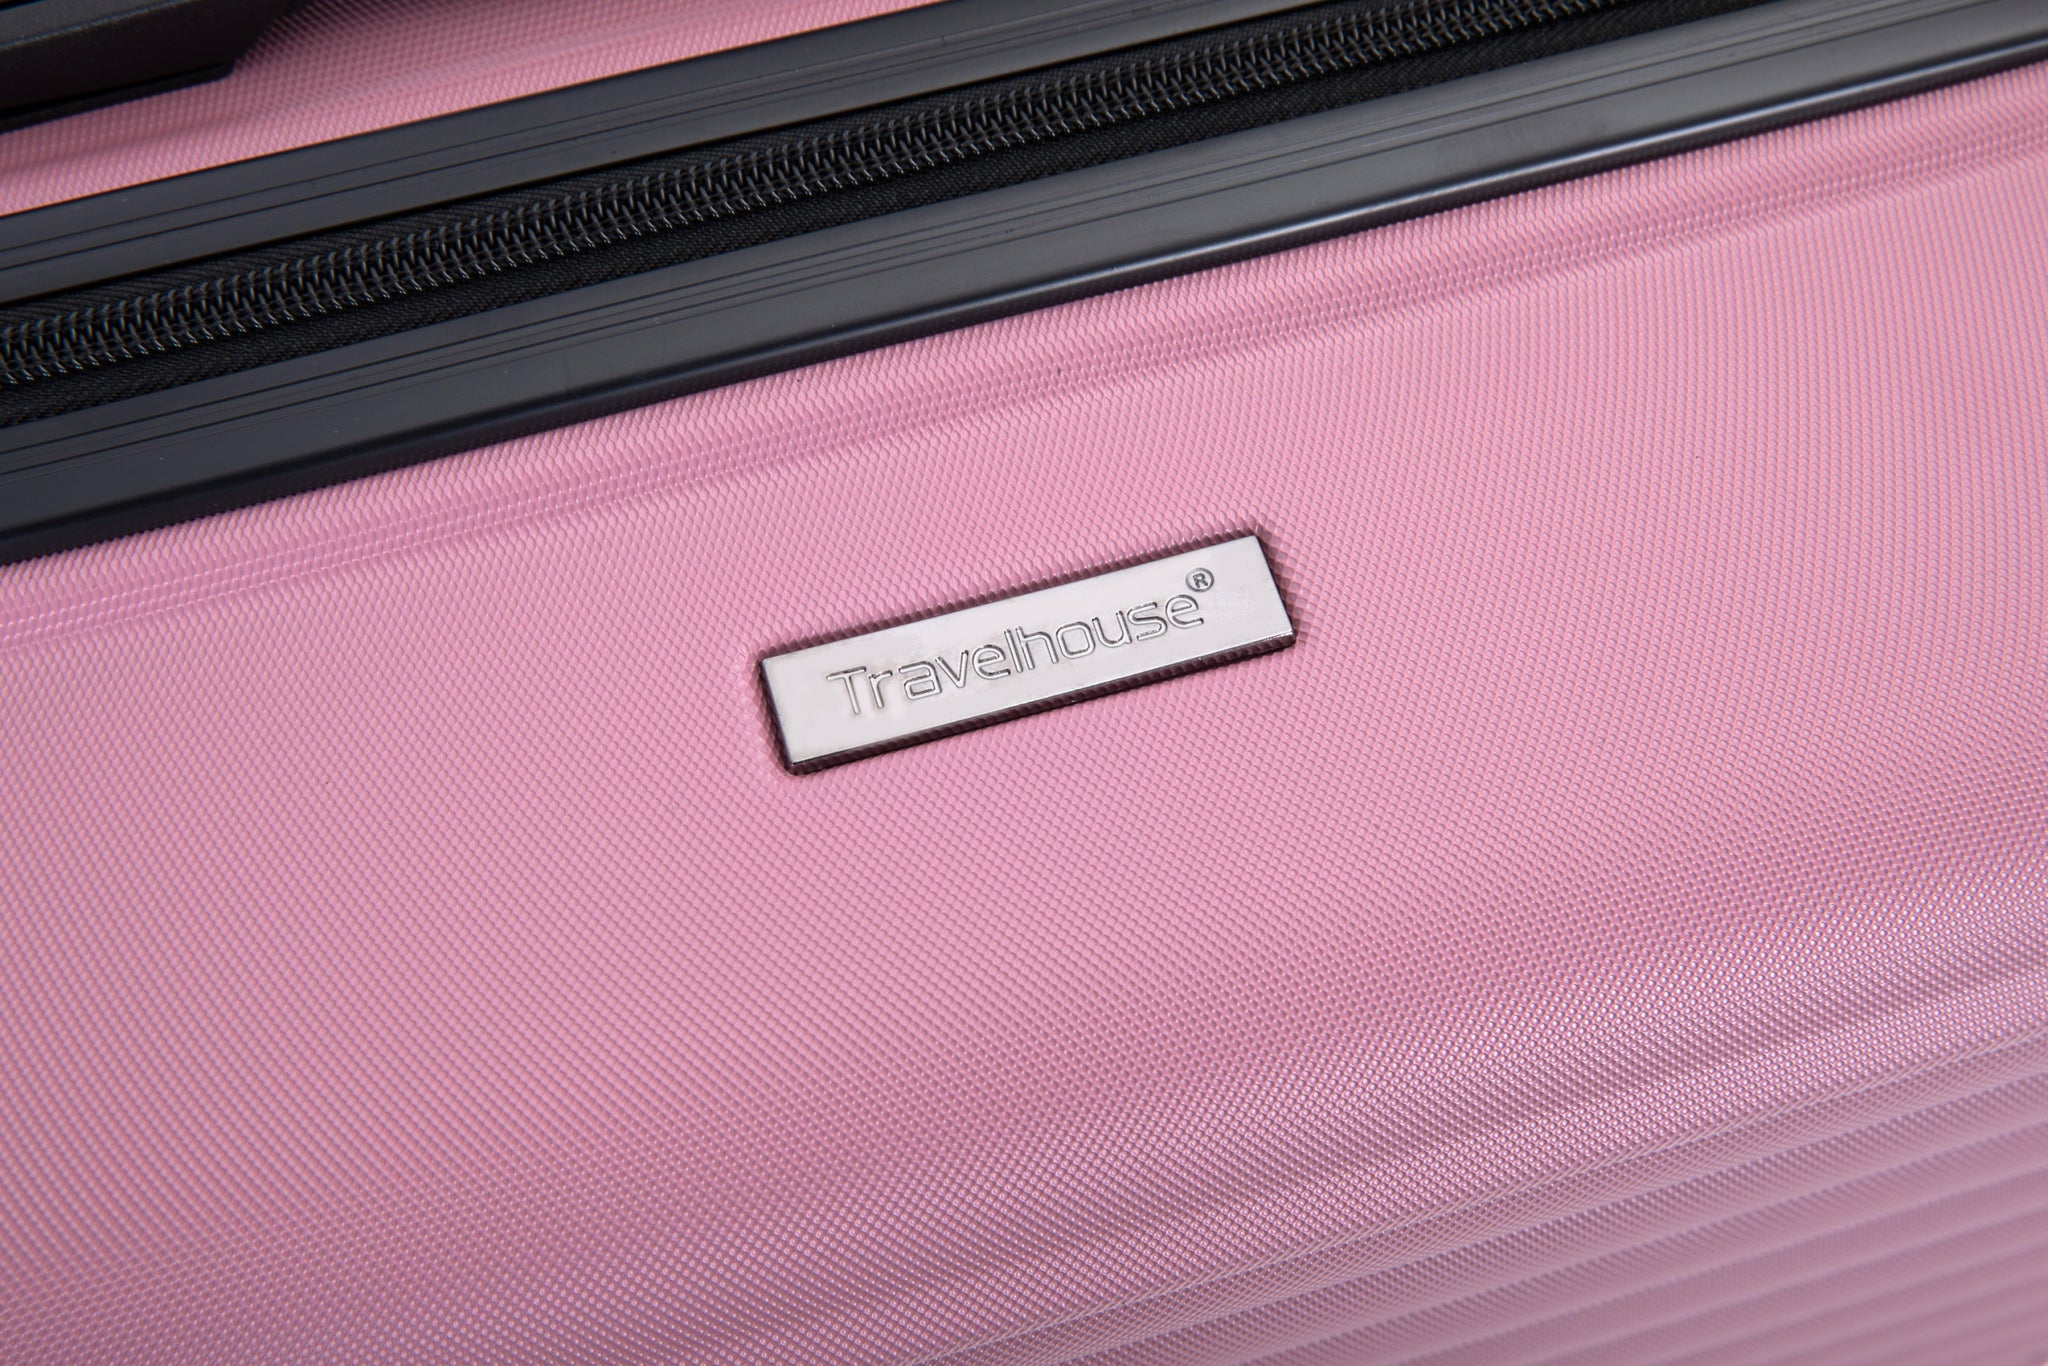 3 Piece Luggage Sets ABS Lightweight Suitcase with Two pink-abs